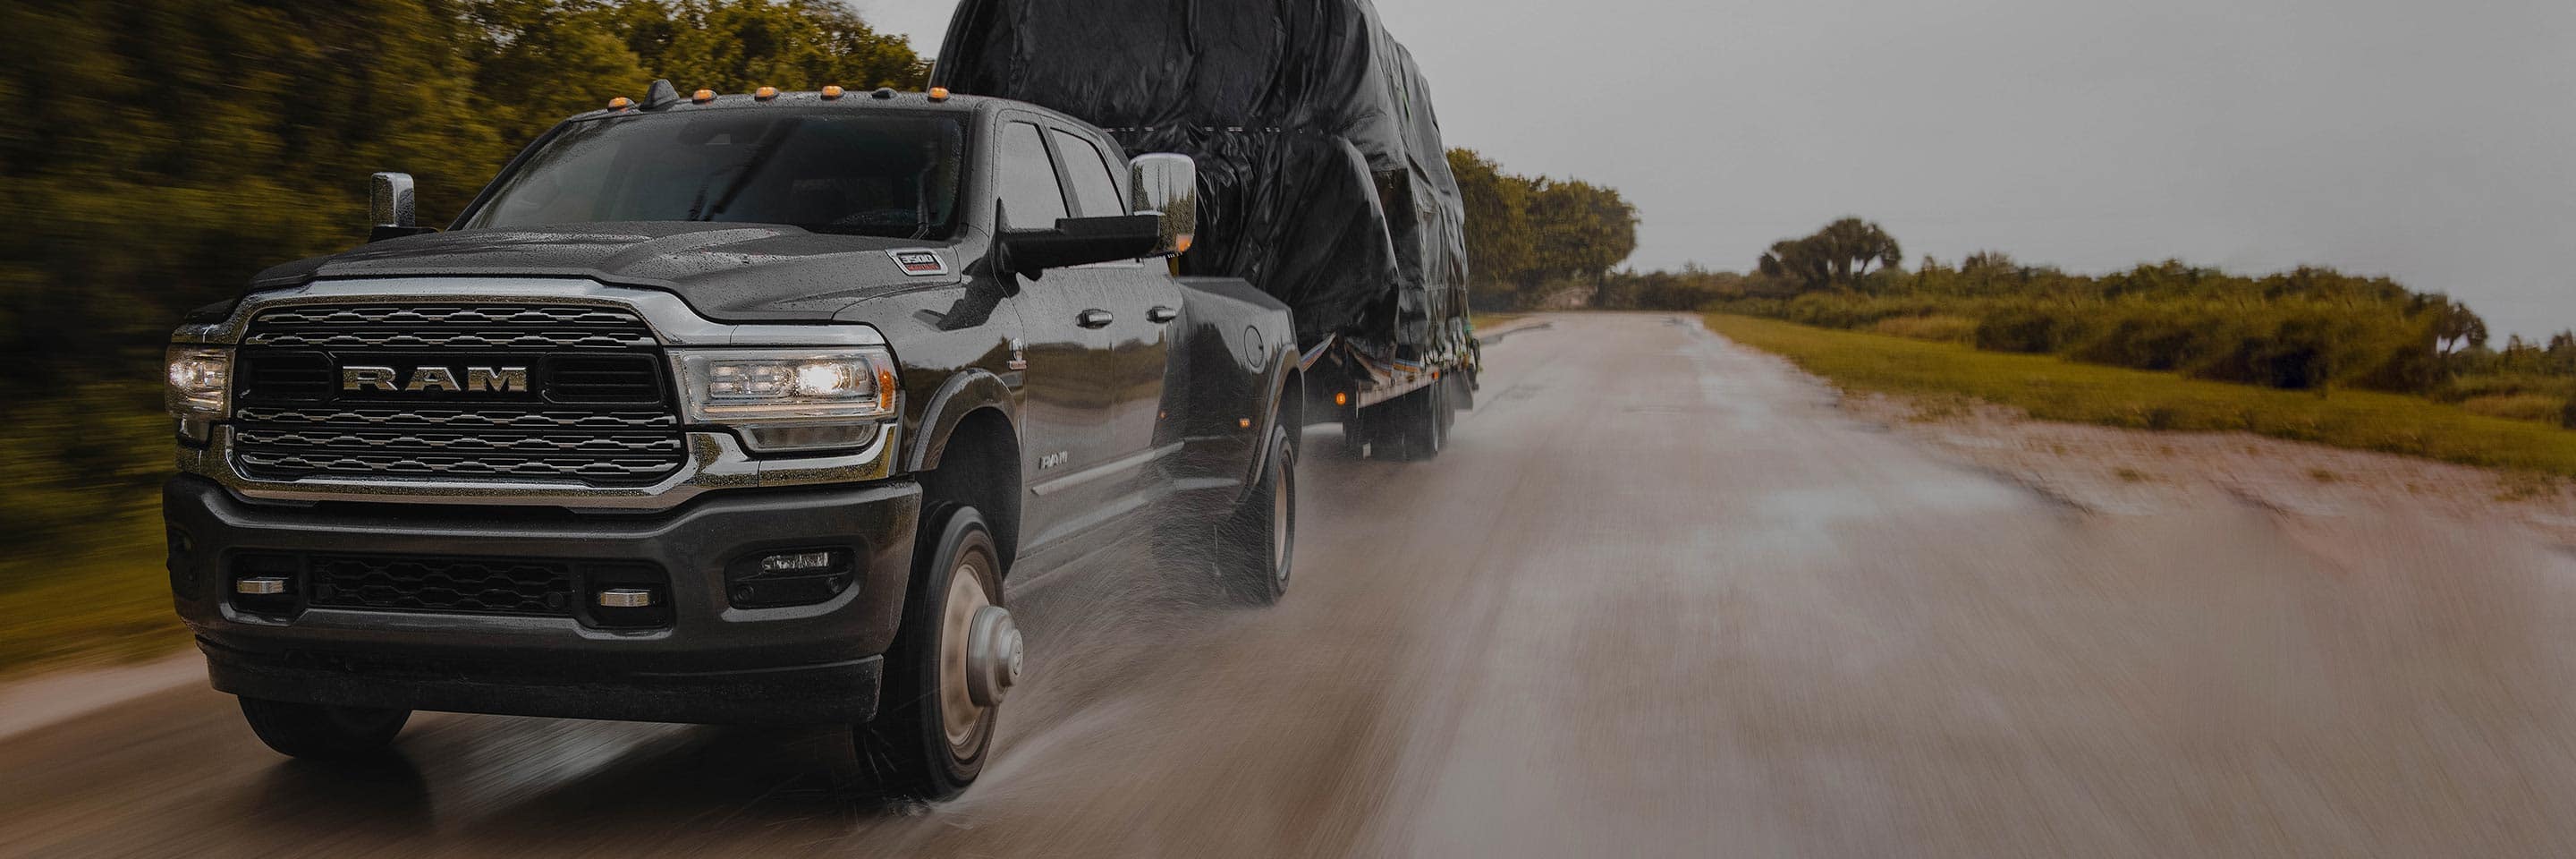 2022 Ram 3500 Heavy Duty | Towing Capacity, Engines & More